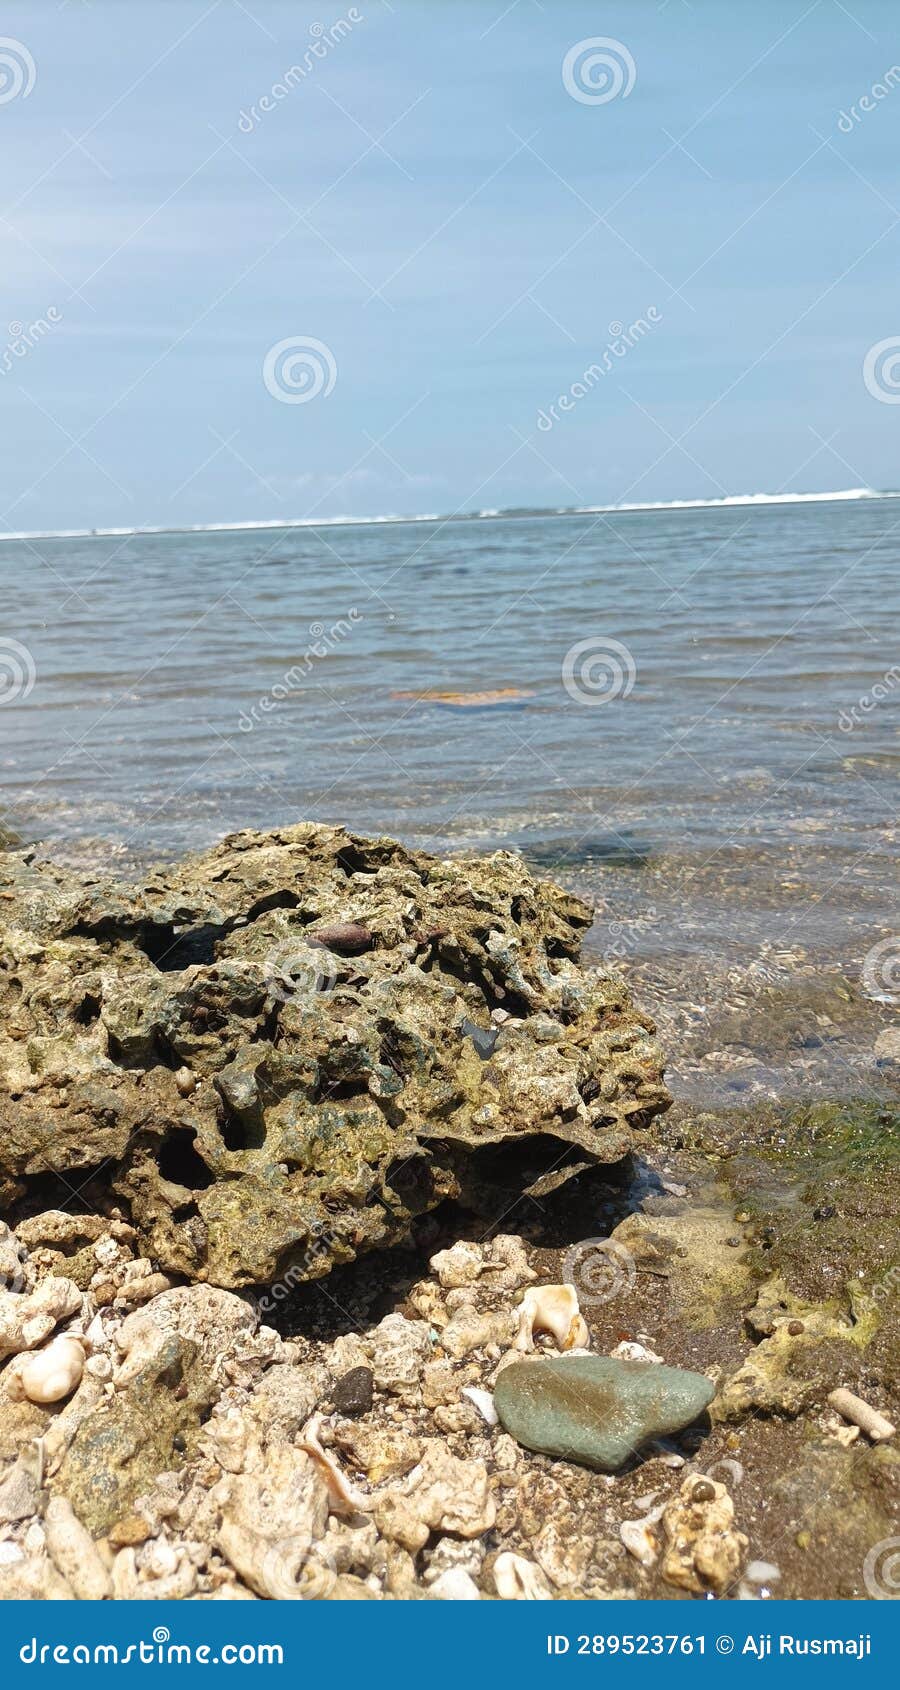 when the sea water recedes we can see the rocks